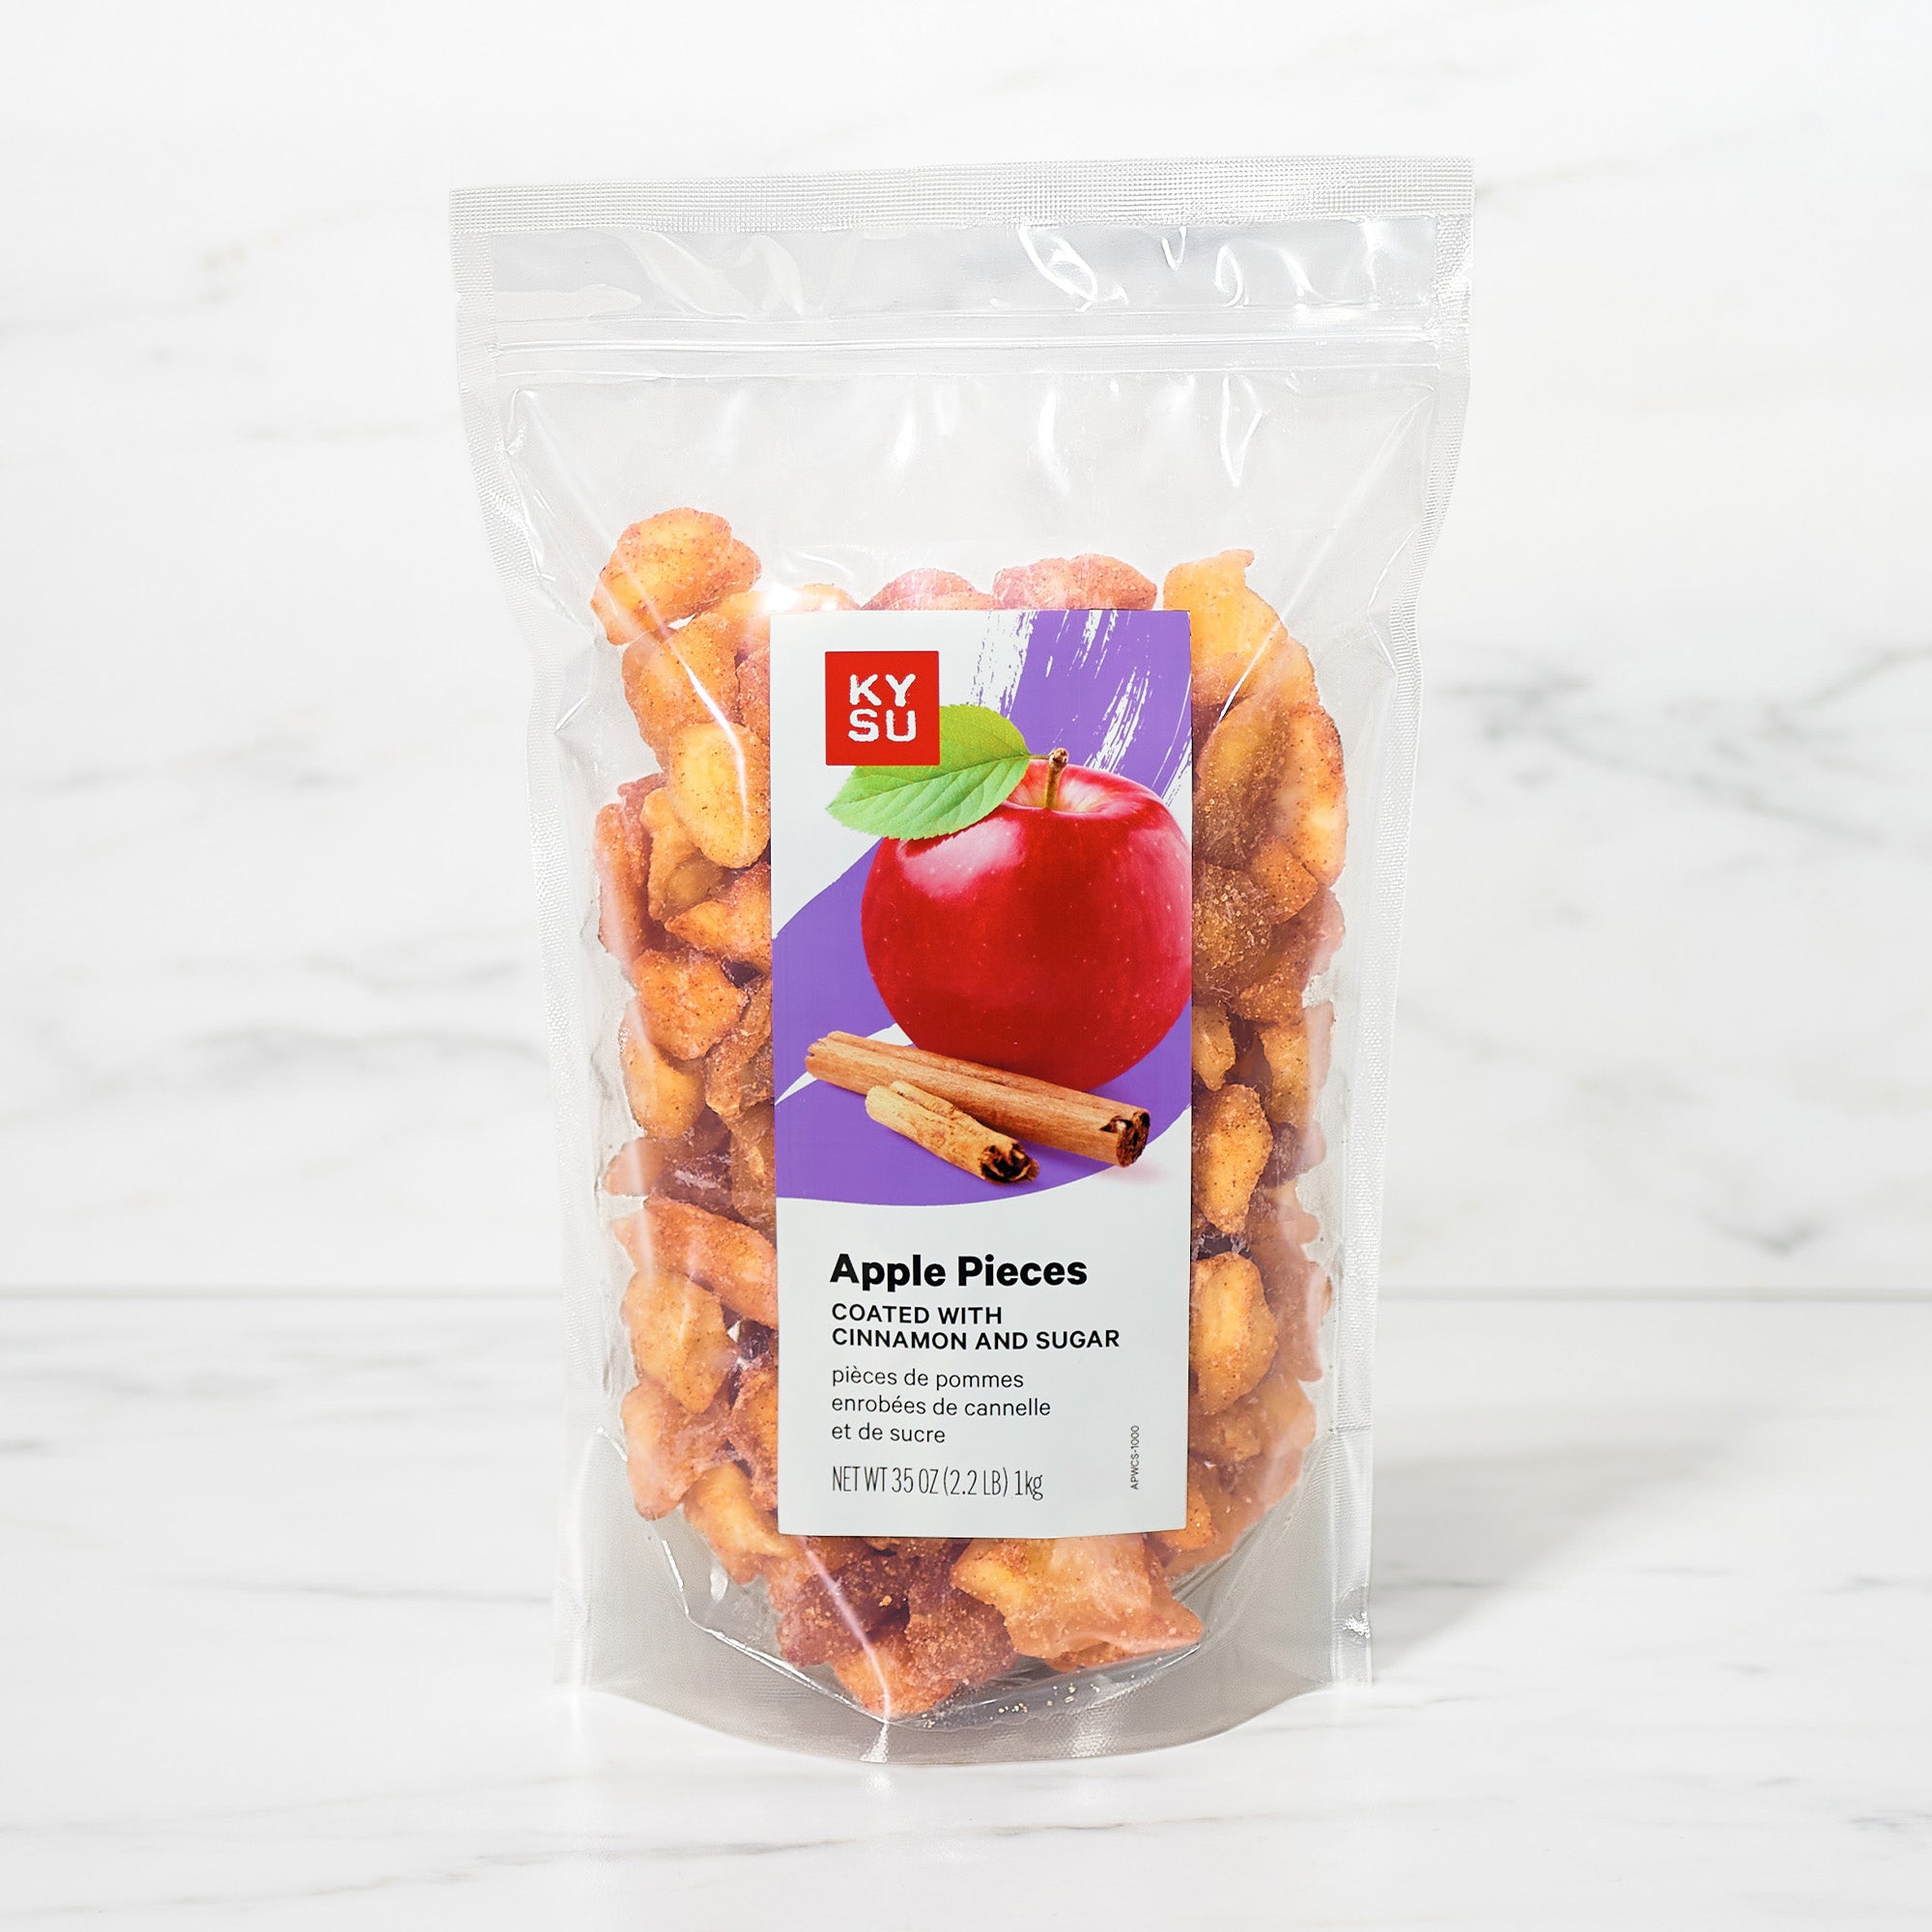 Apple pieces coated with cinnamon and sugar, 2.2 lb